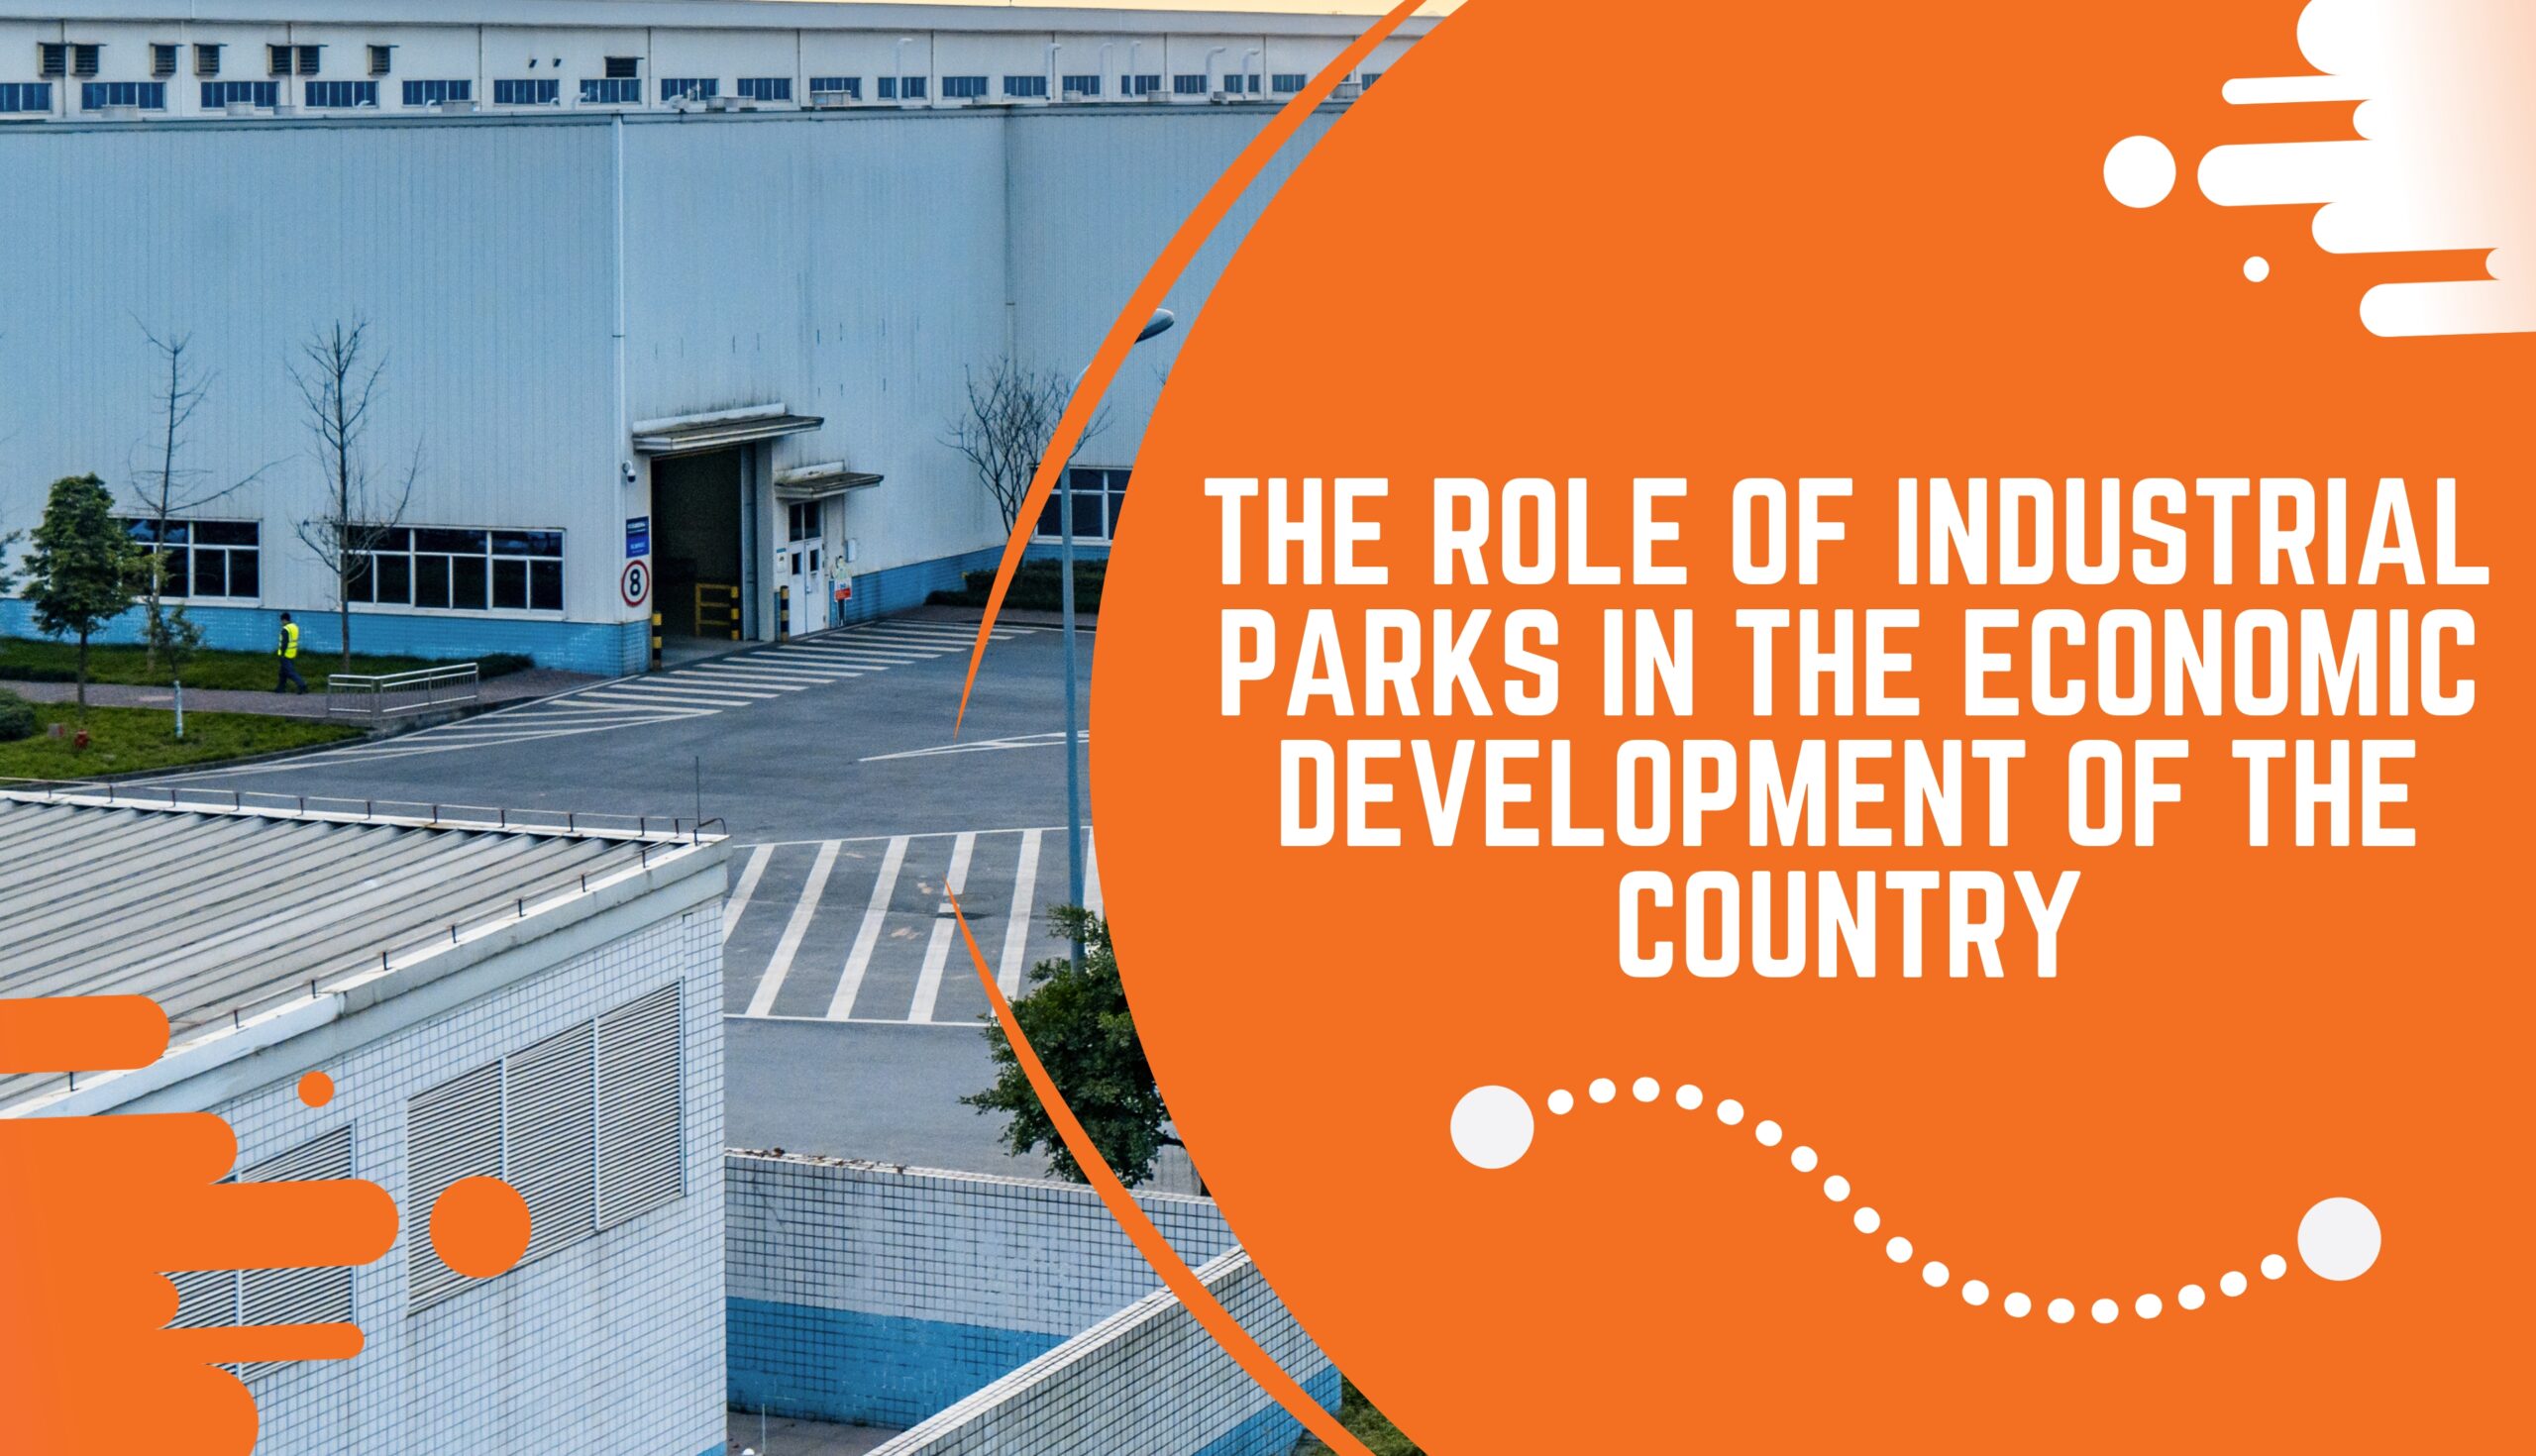 The Role of Industrial Parks in the Economic Development of the Country